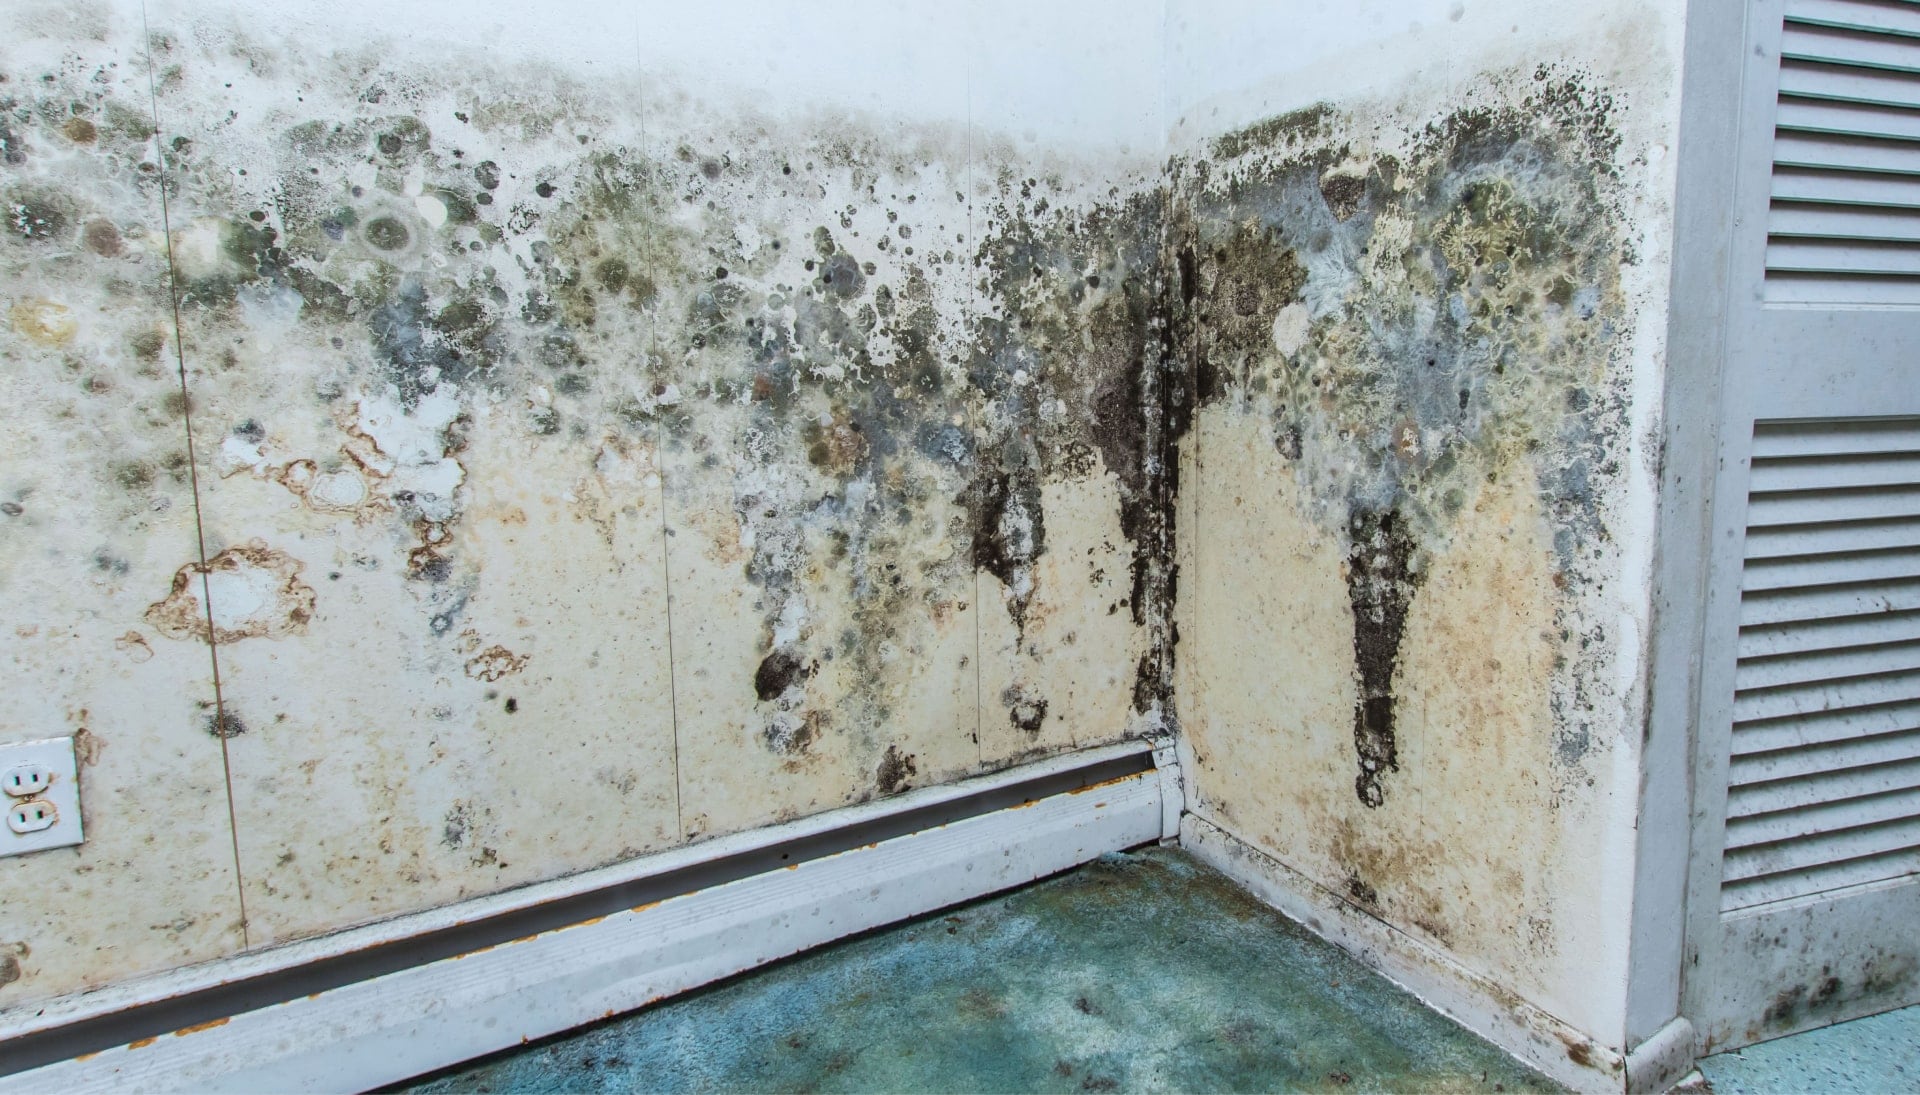 Mold overtakes a wall and carpet during a water damage cleanup in a home in Savannah, GA.